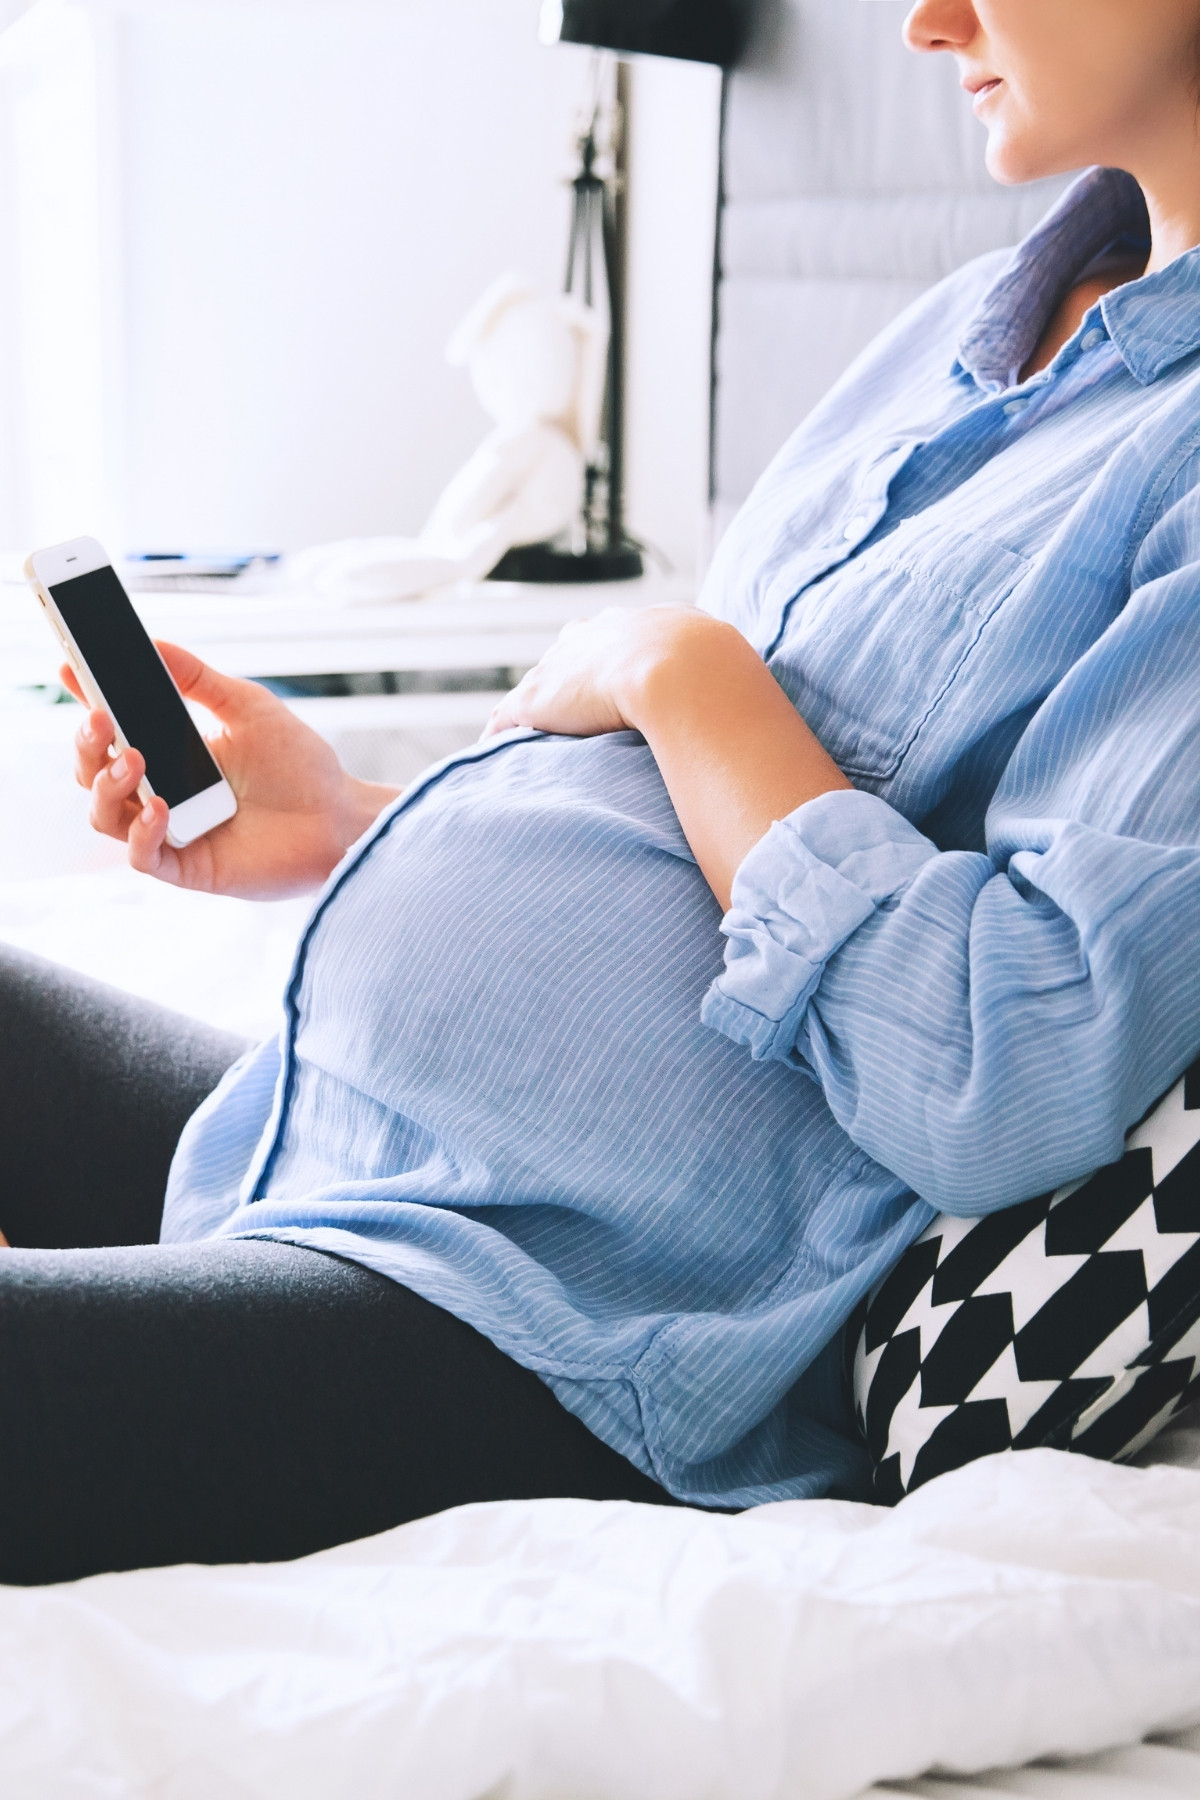 Pregnant woman types essential questions to ask at your 1st prenatal appointment into her phone.